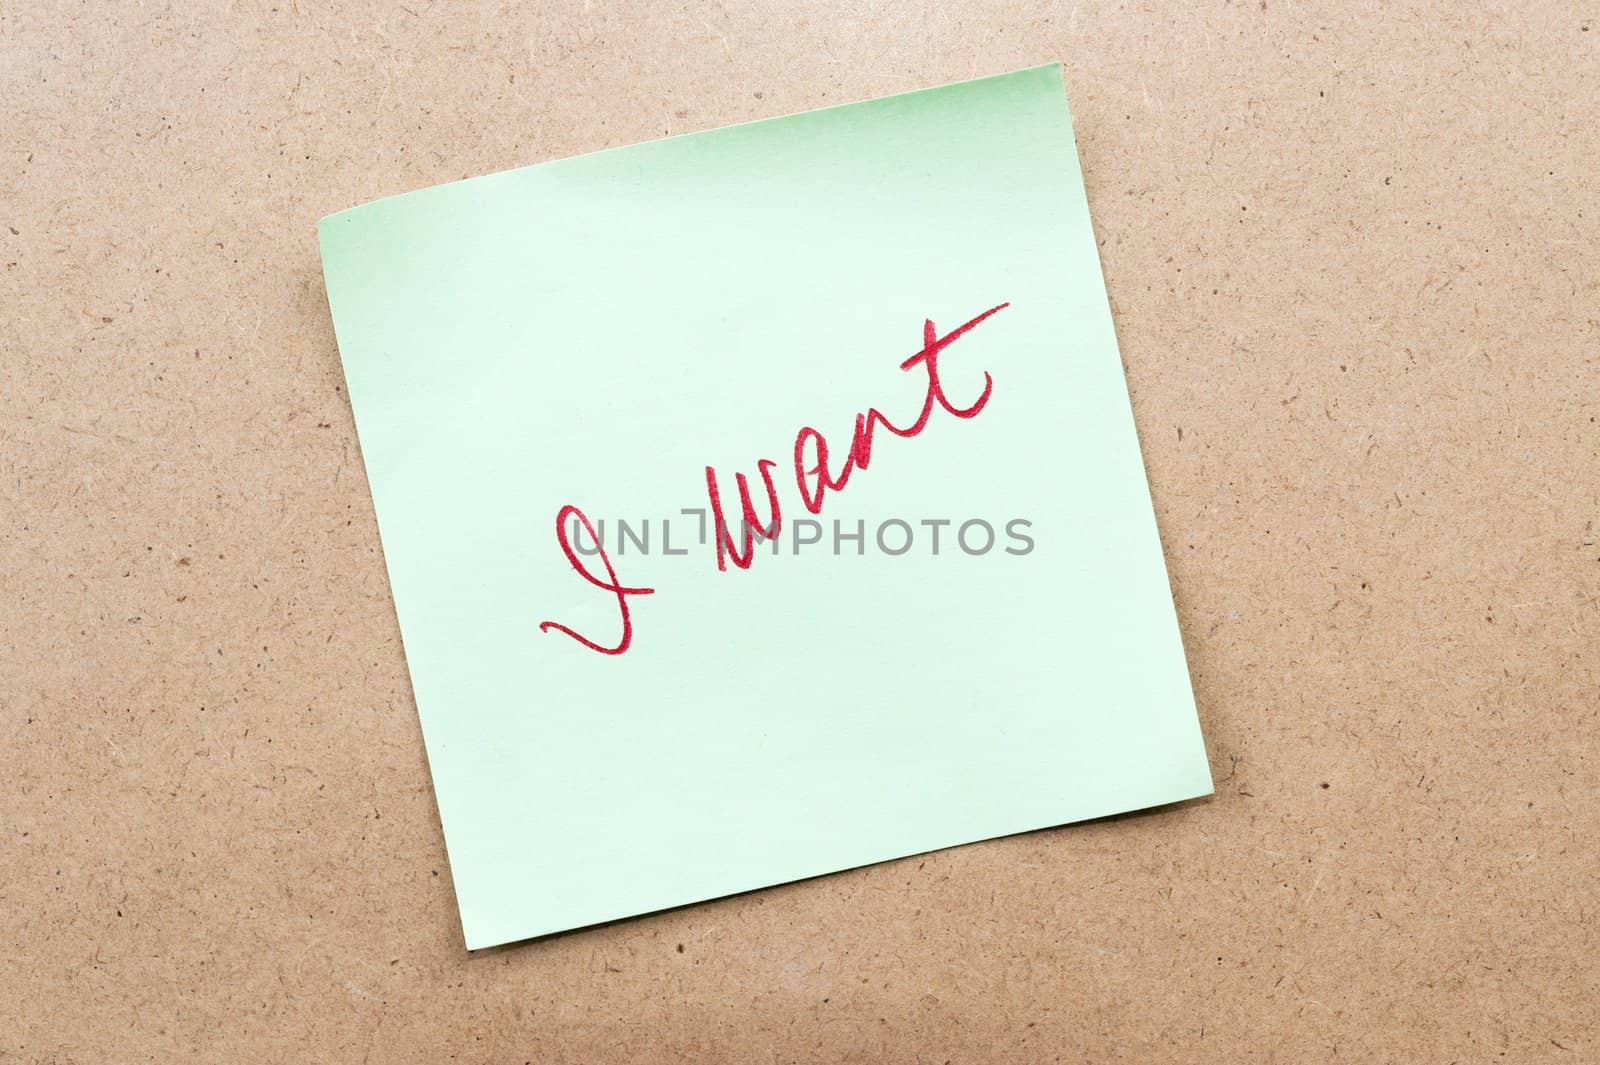 I want words written on a sticky note